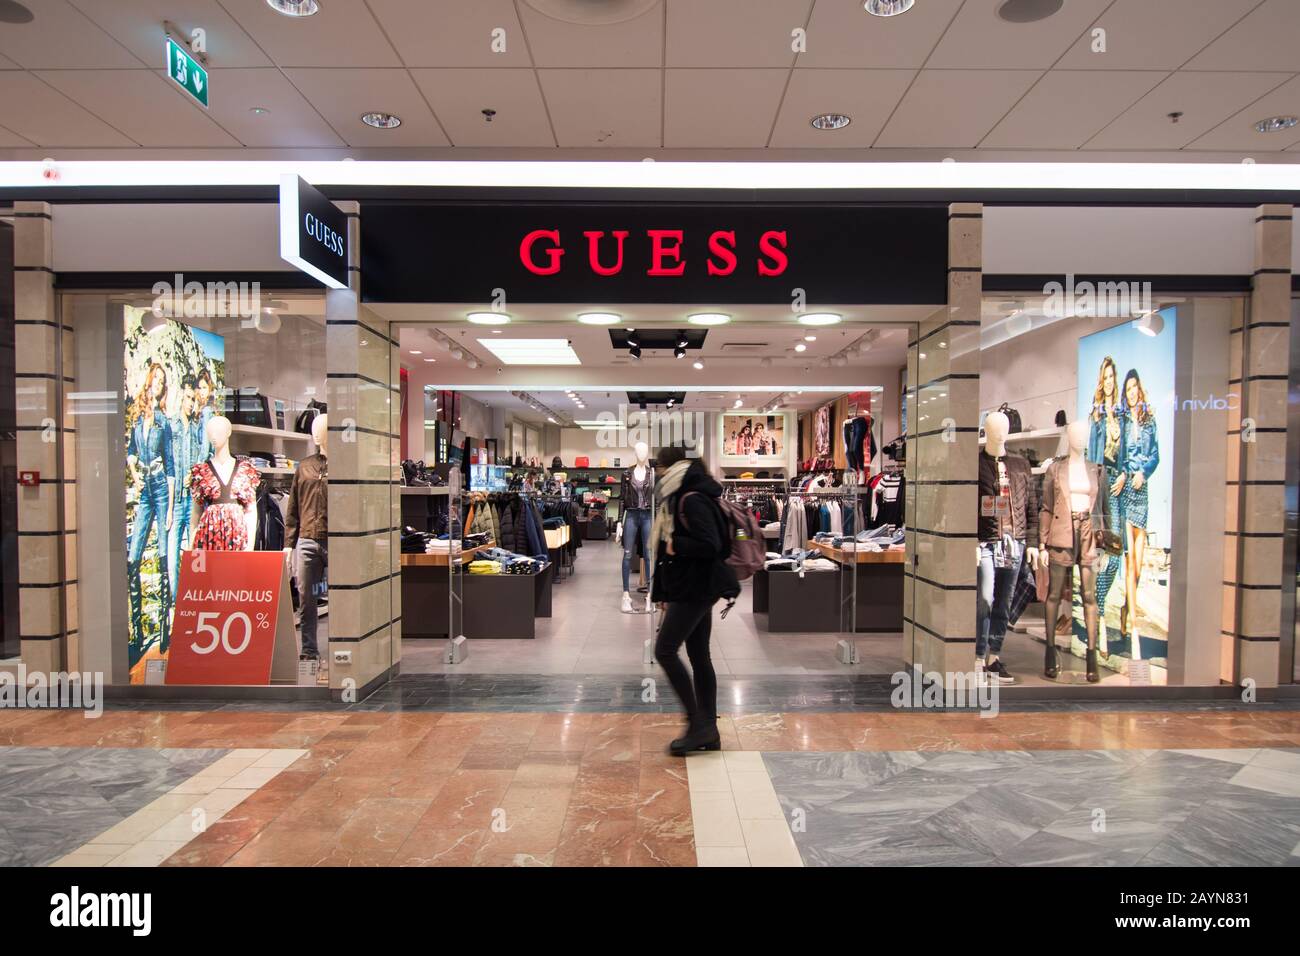 Guess Shop High Resolution Stock Photography and Images - Alamy